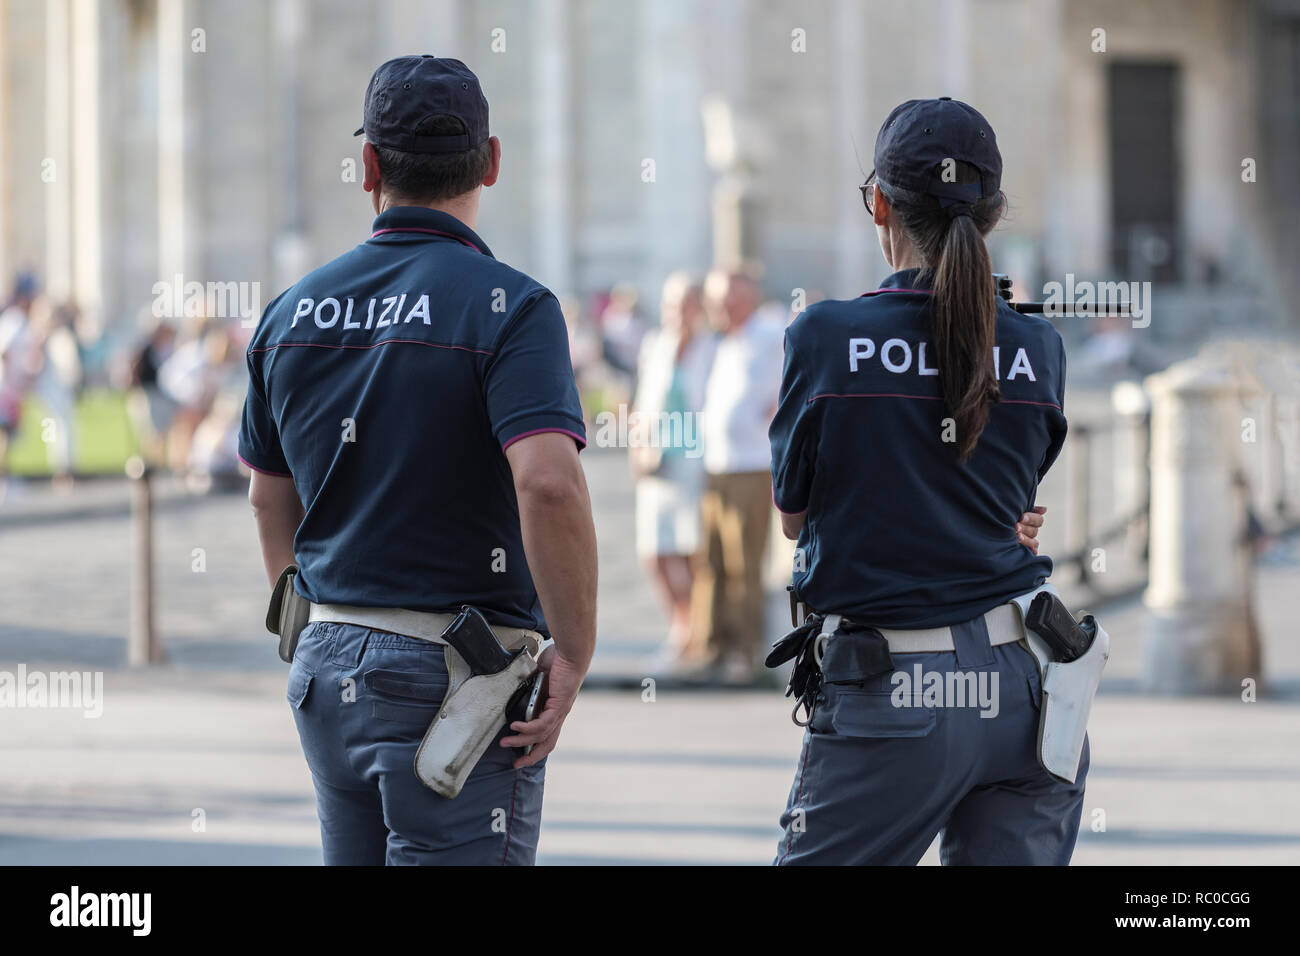 Male and female police officers on duty, Pisa, Tuscany, Italy, Europe Stock Photo